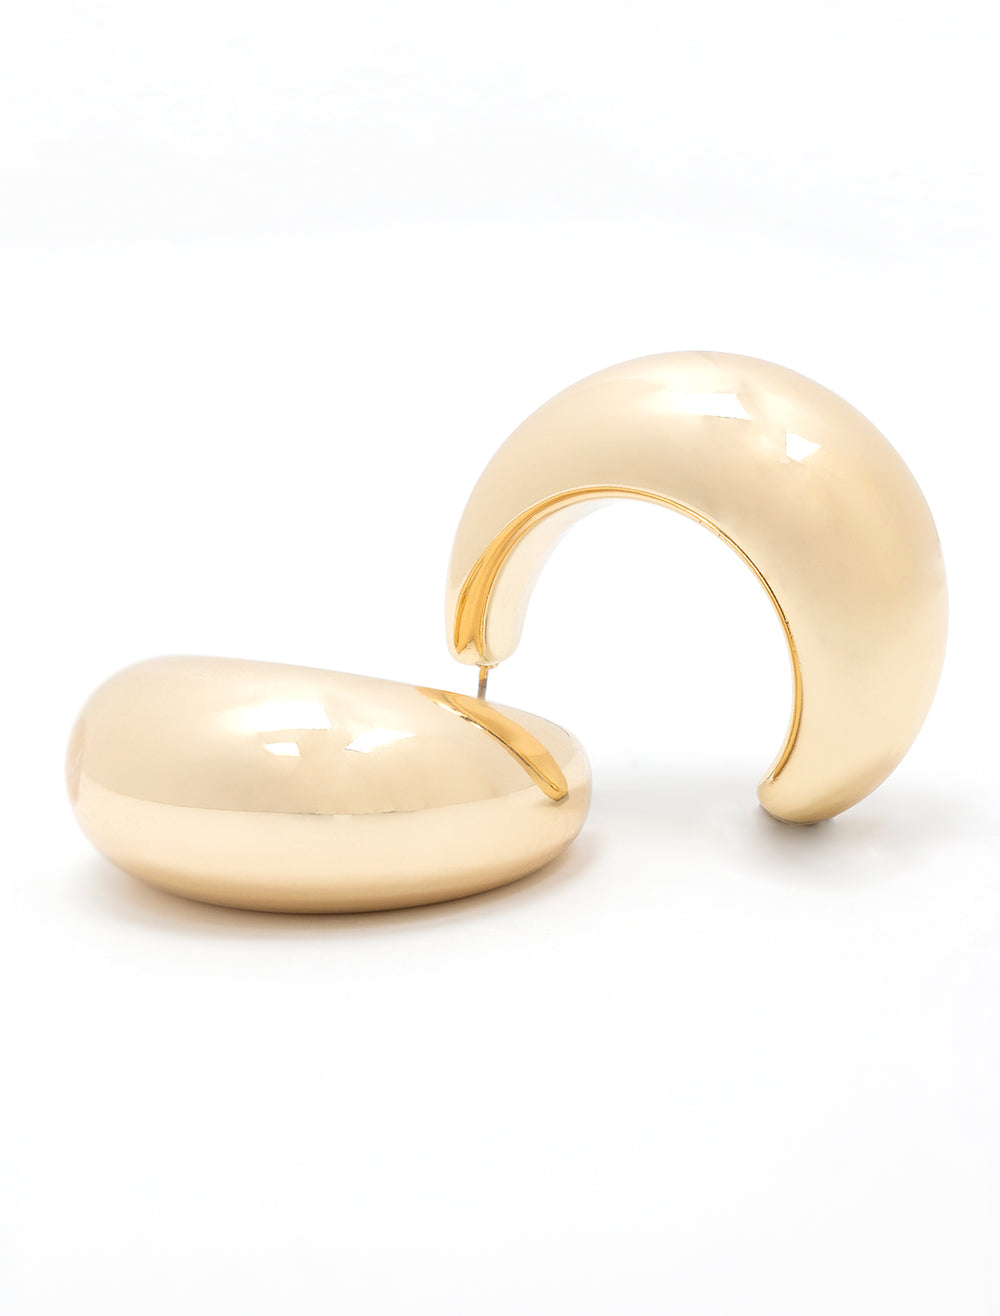 Laydown of AV Max's large puffy hoops in gold.